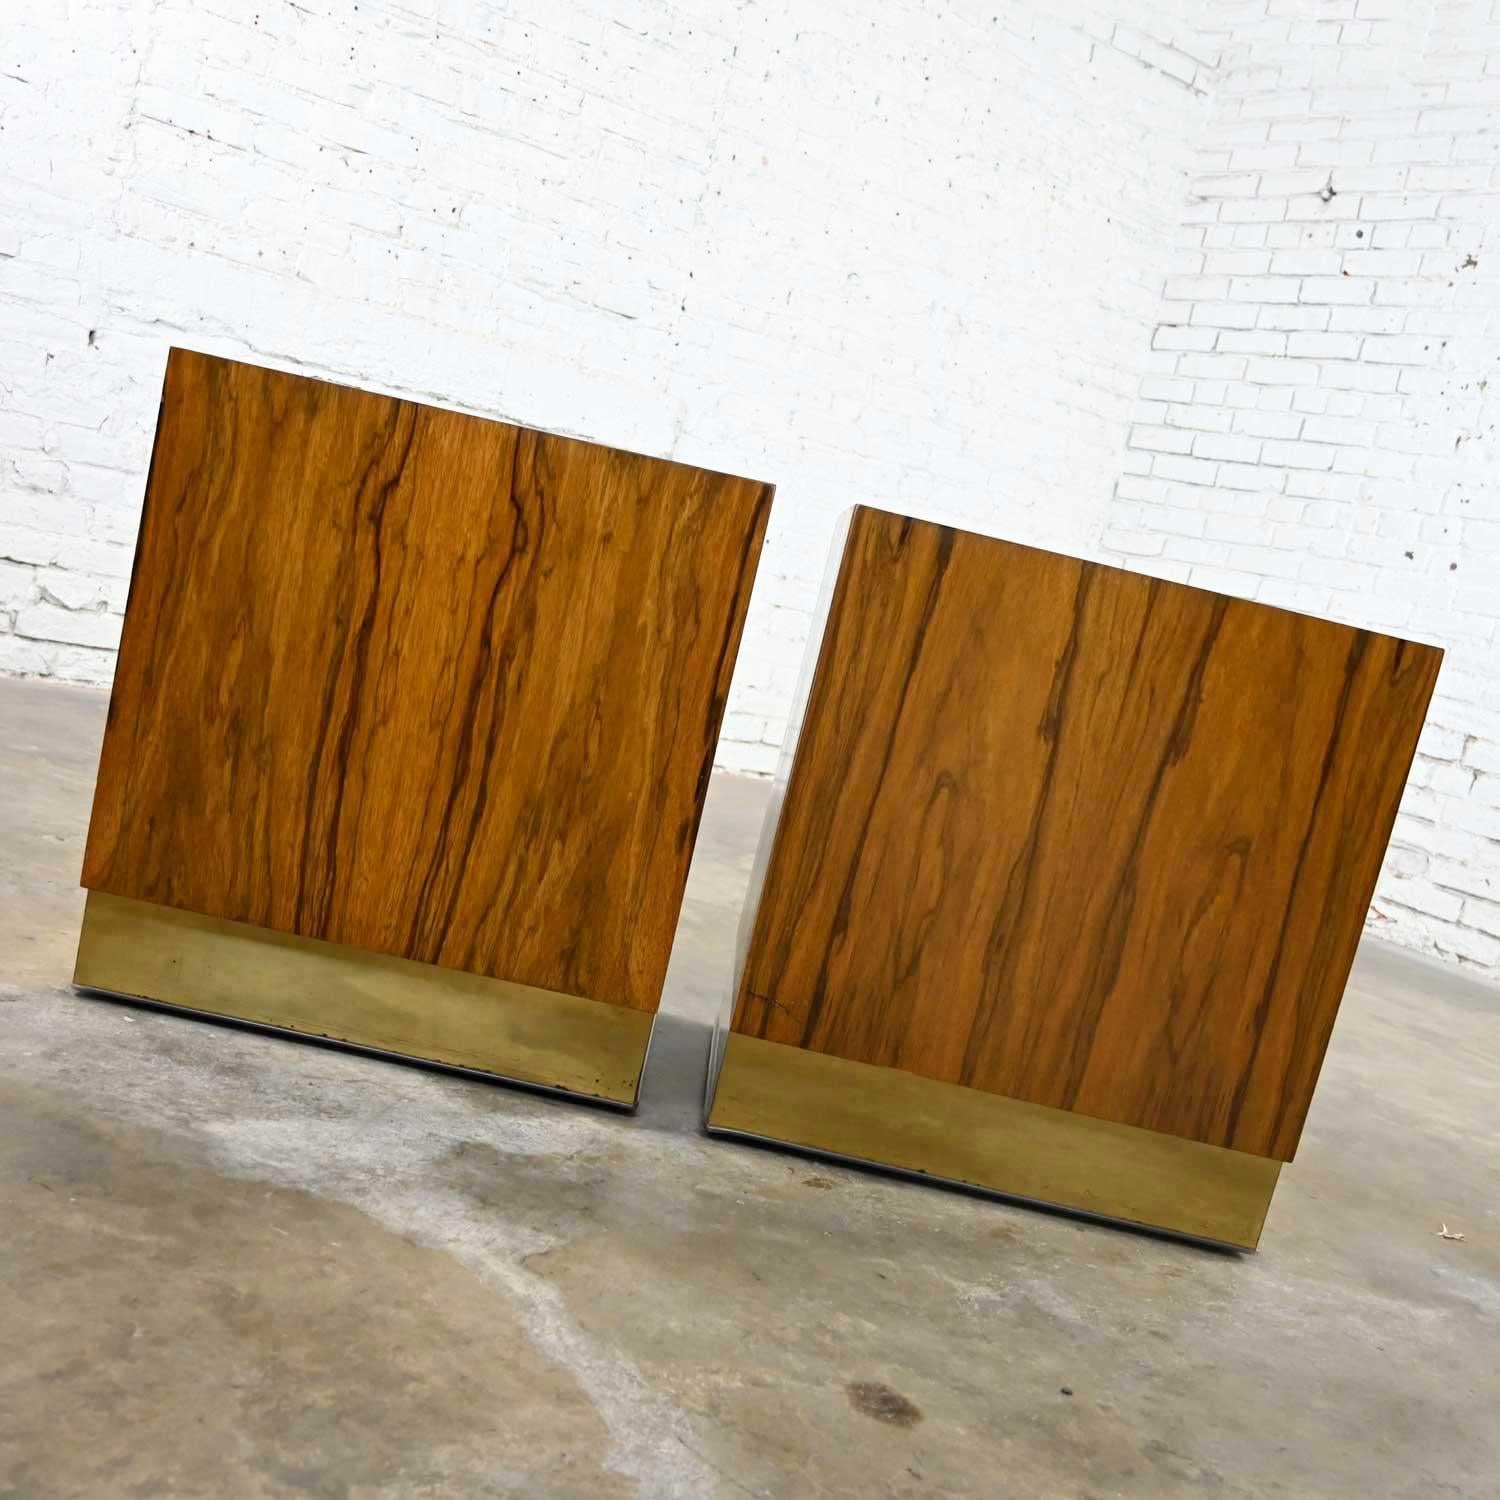 Plated Vintage Modern Rosewood Pair Cube Nightstands by Milo Baughman for Thayer Coggin For Sale